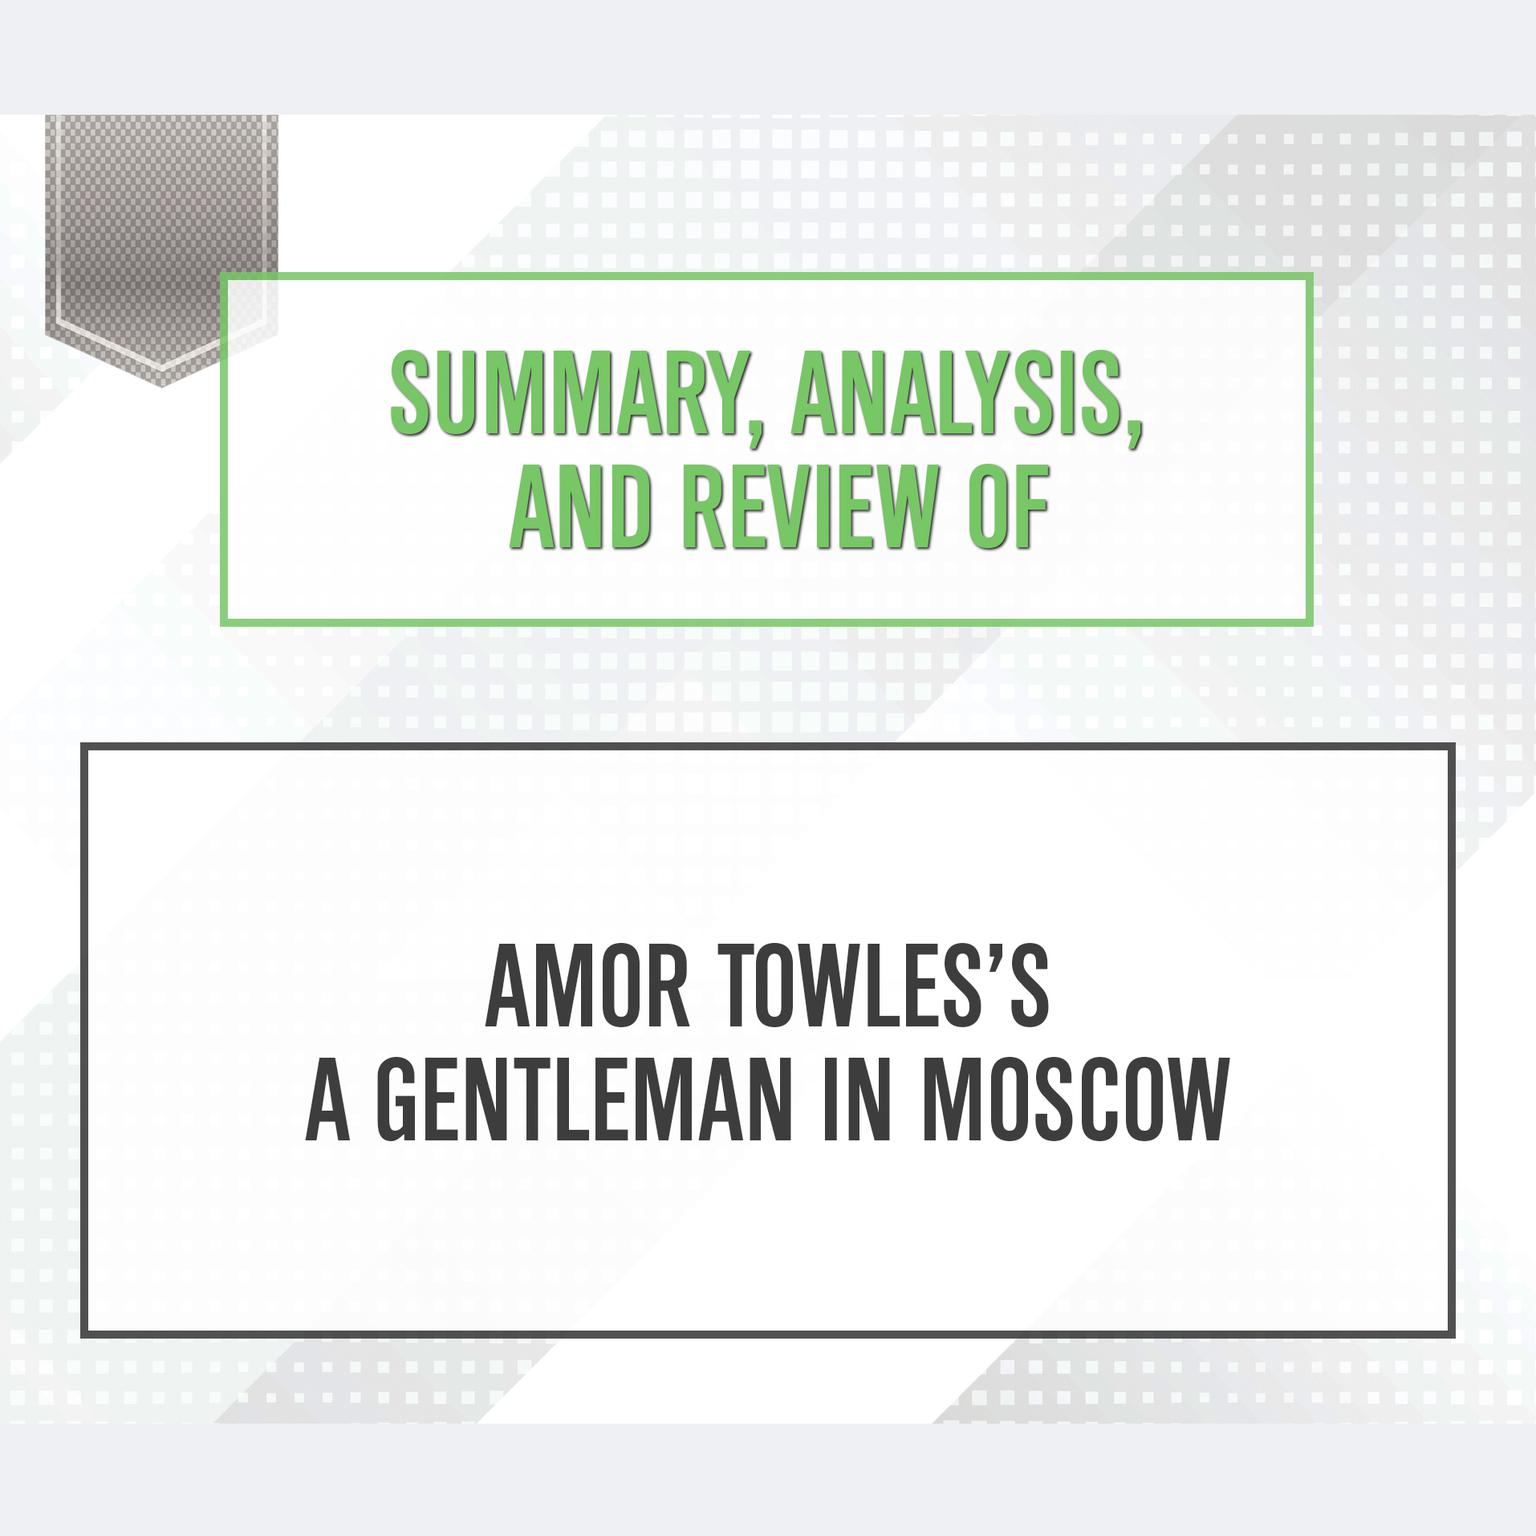 Summary, Analysis, and Review of Amor Towless A Gentleman in Moscow Audiobook, by Start Publishing Notes